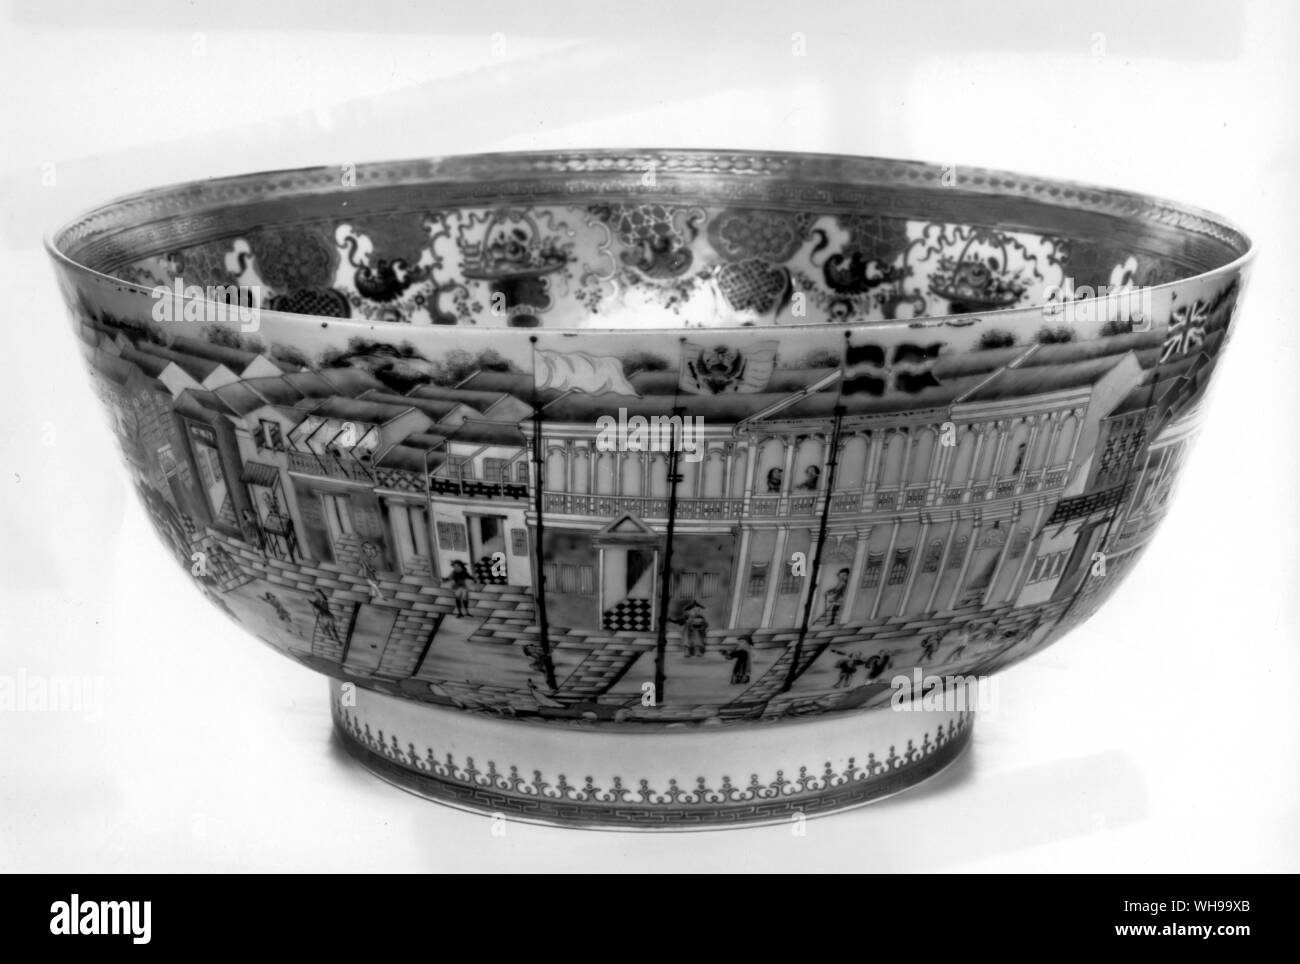 The European nations' trading posts (factories) at Whampoa, Canton, as shown on a late 18th century Chinese punch bowl, itself copying a European engraving. The flags of britain, Sweden and Austria can be seen. Stock Photo